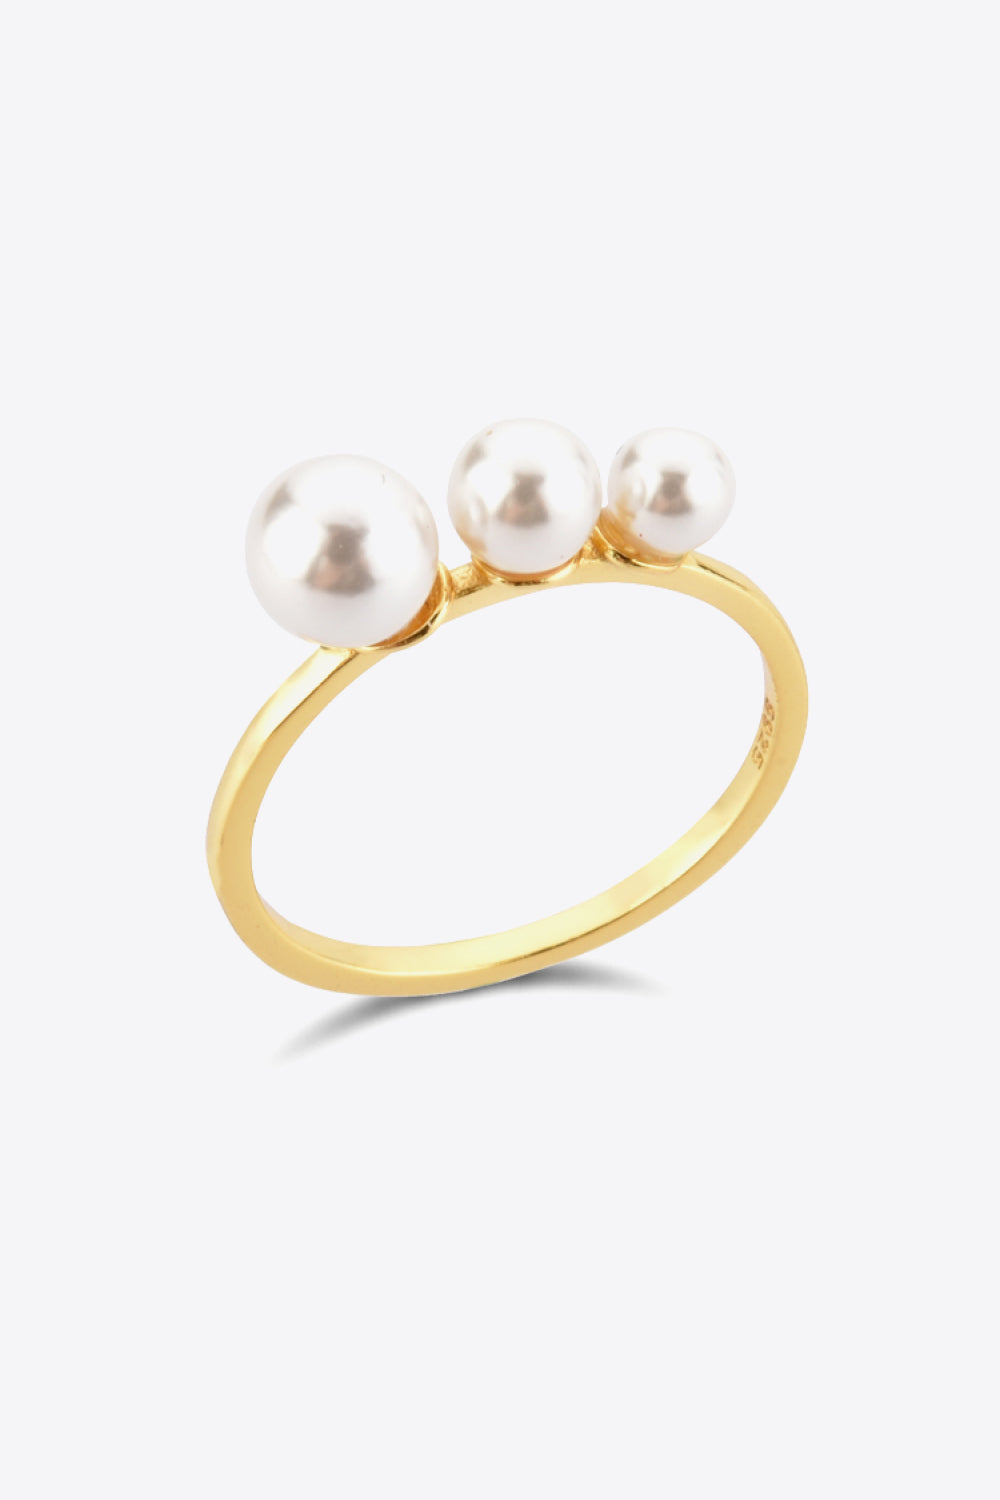 Pearl 925 Sterling Silver Ring